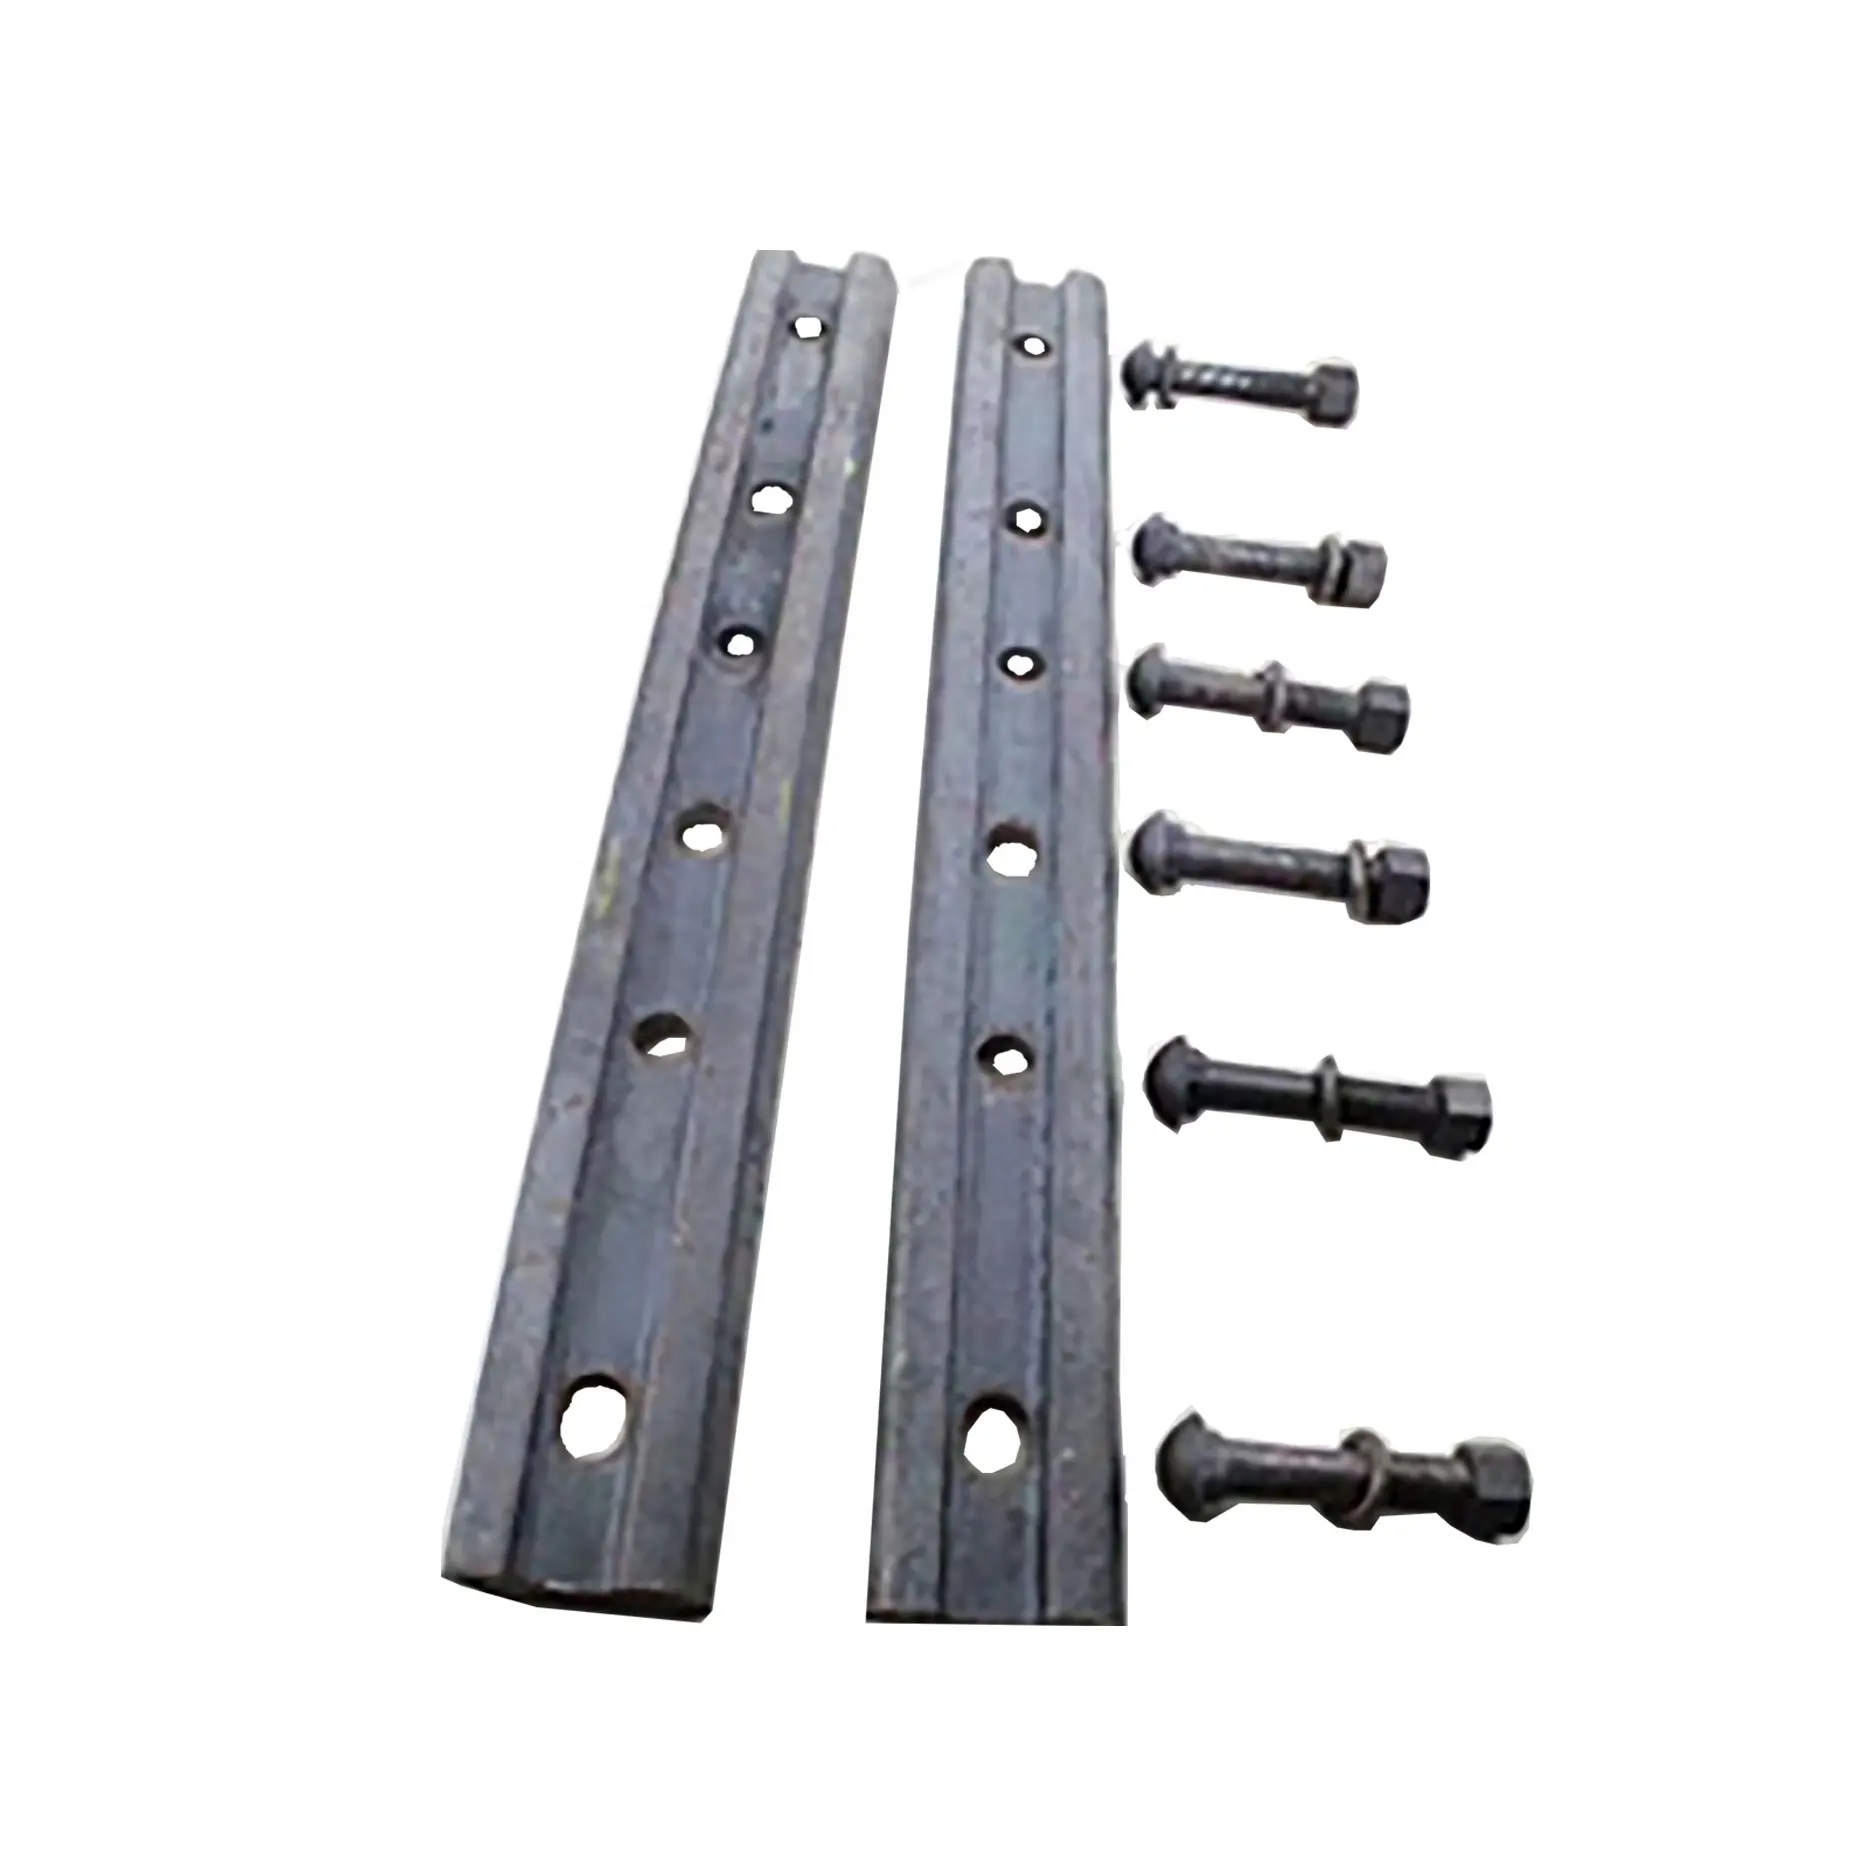 Railway fish plate joint bar with matched bolt and nut for connecting rails